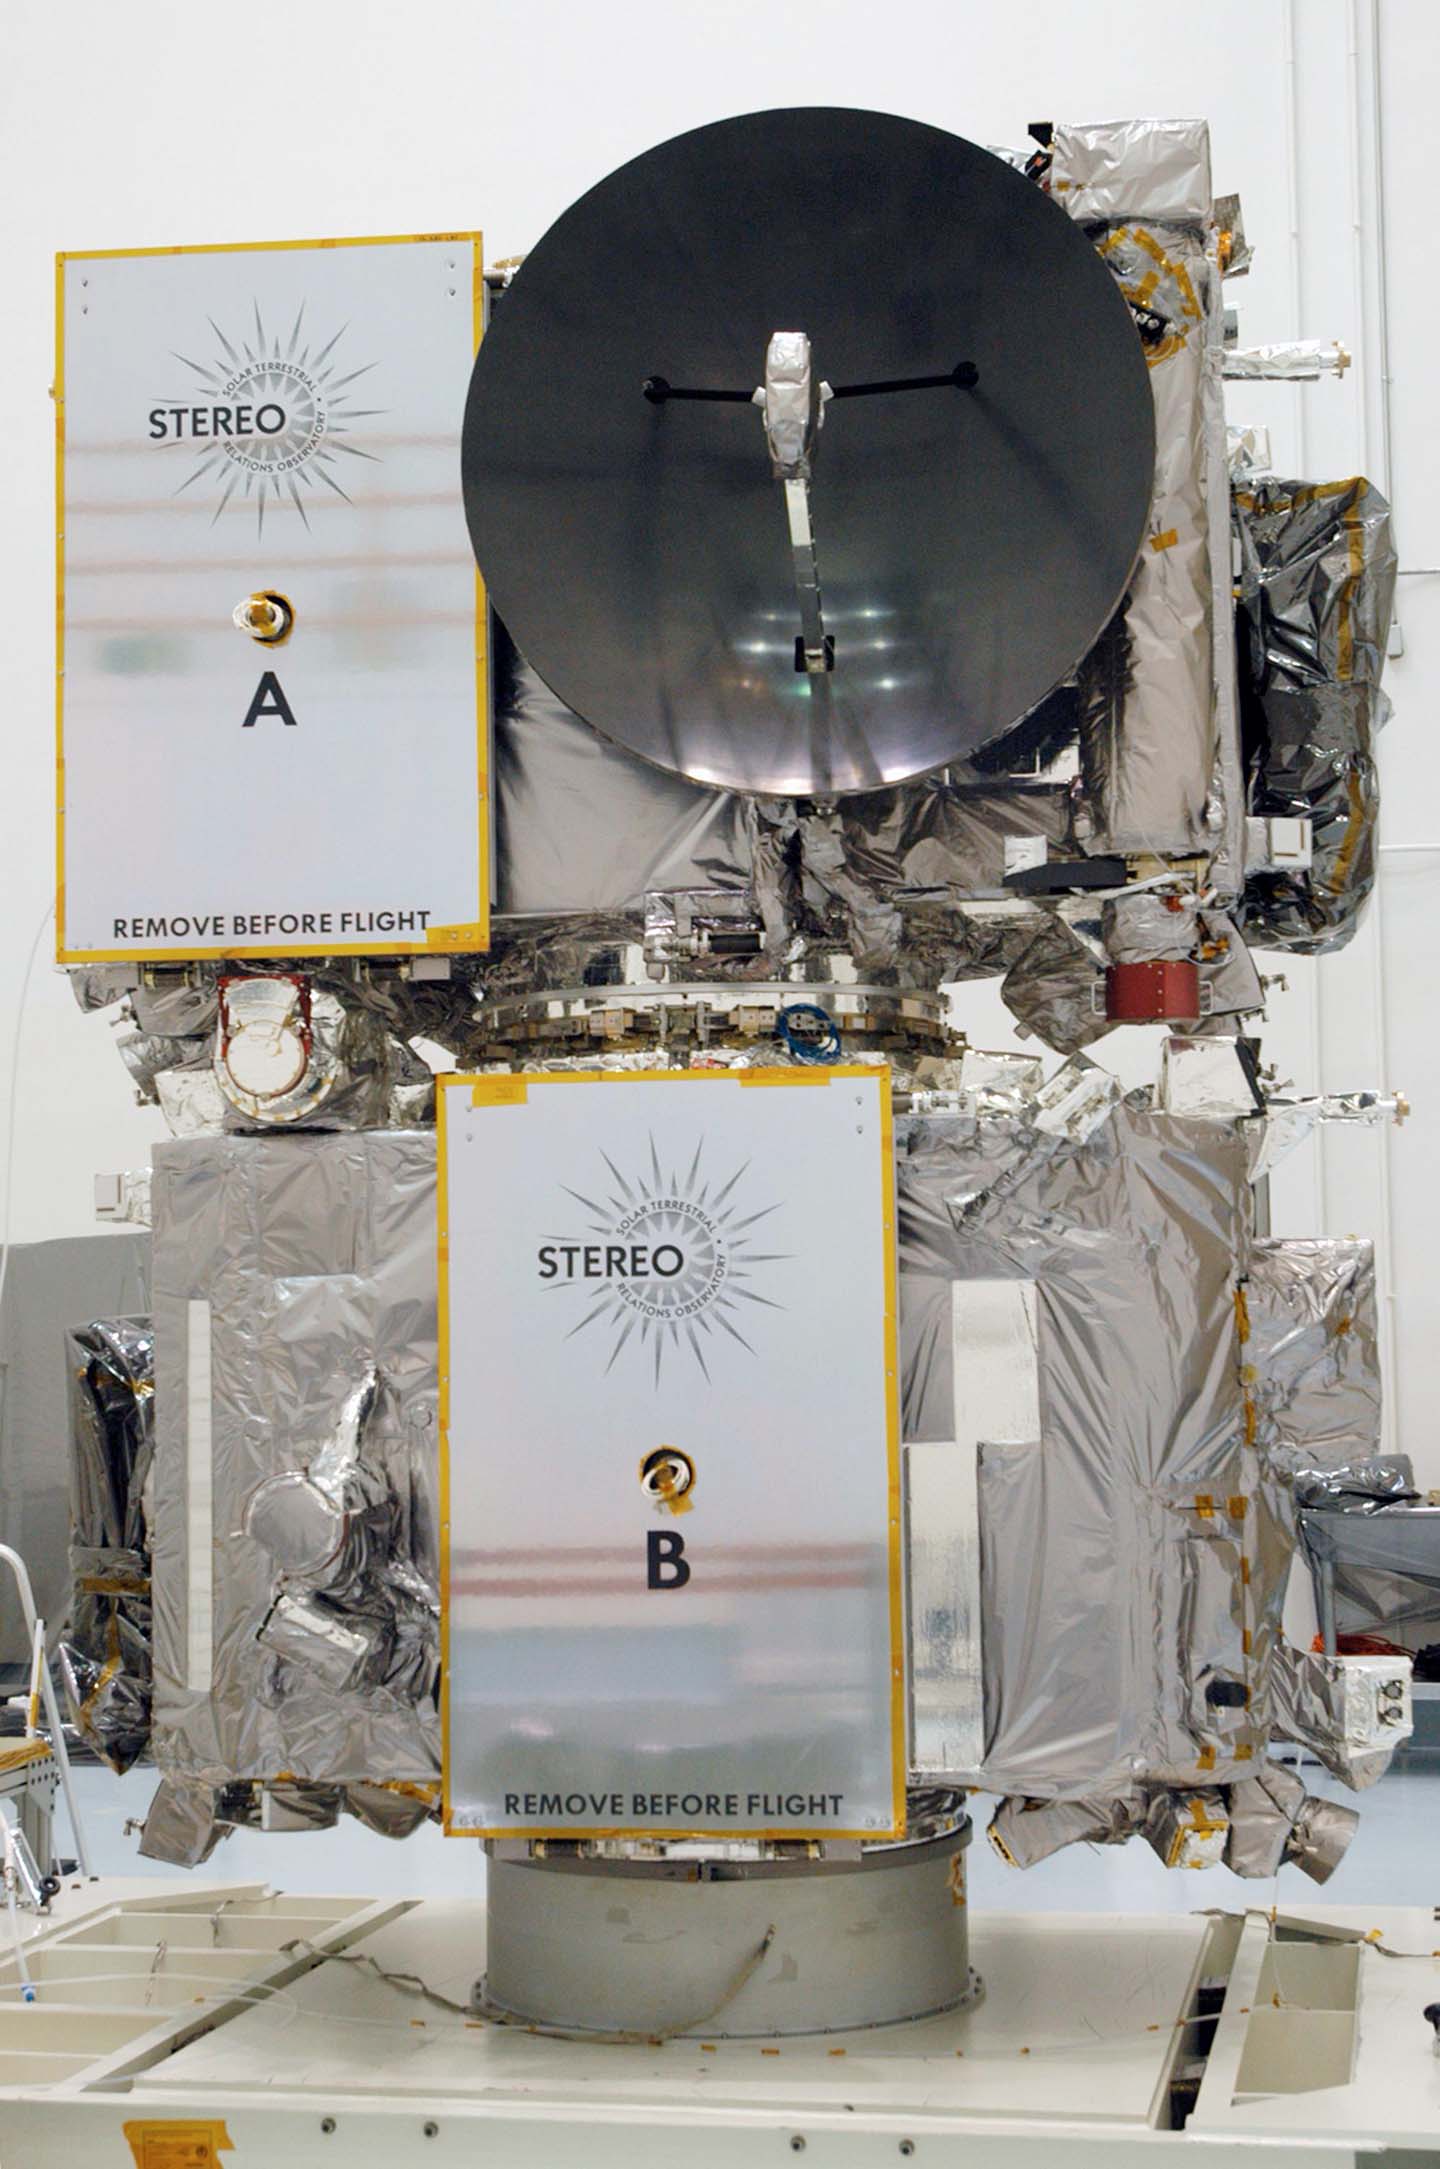 The STEREO spacecraft sits on a test stand inside the Astrotech facility in Titusville, Florida,